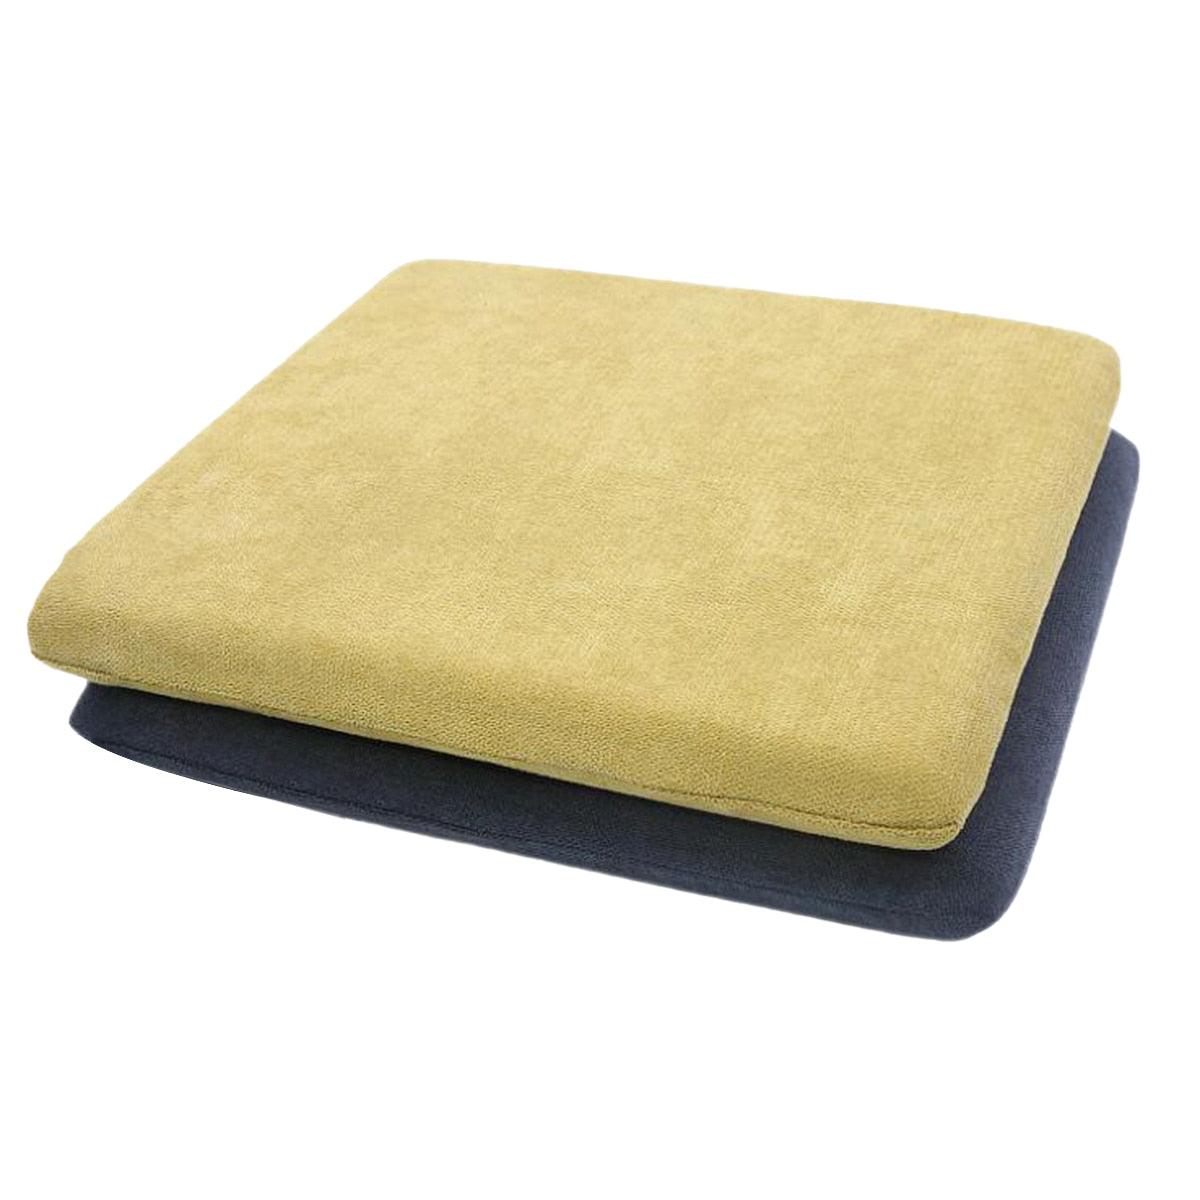 Square Chair Cushion - Office Cozy